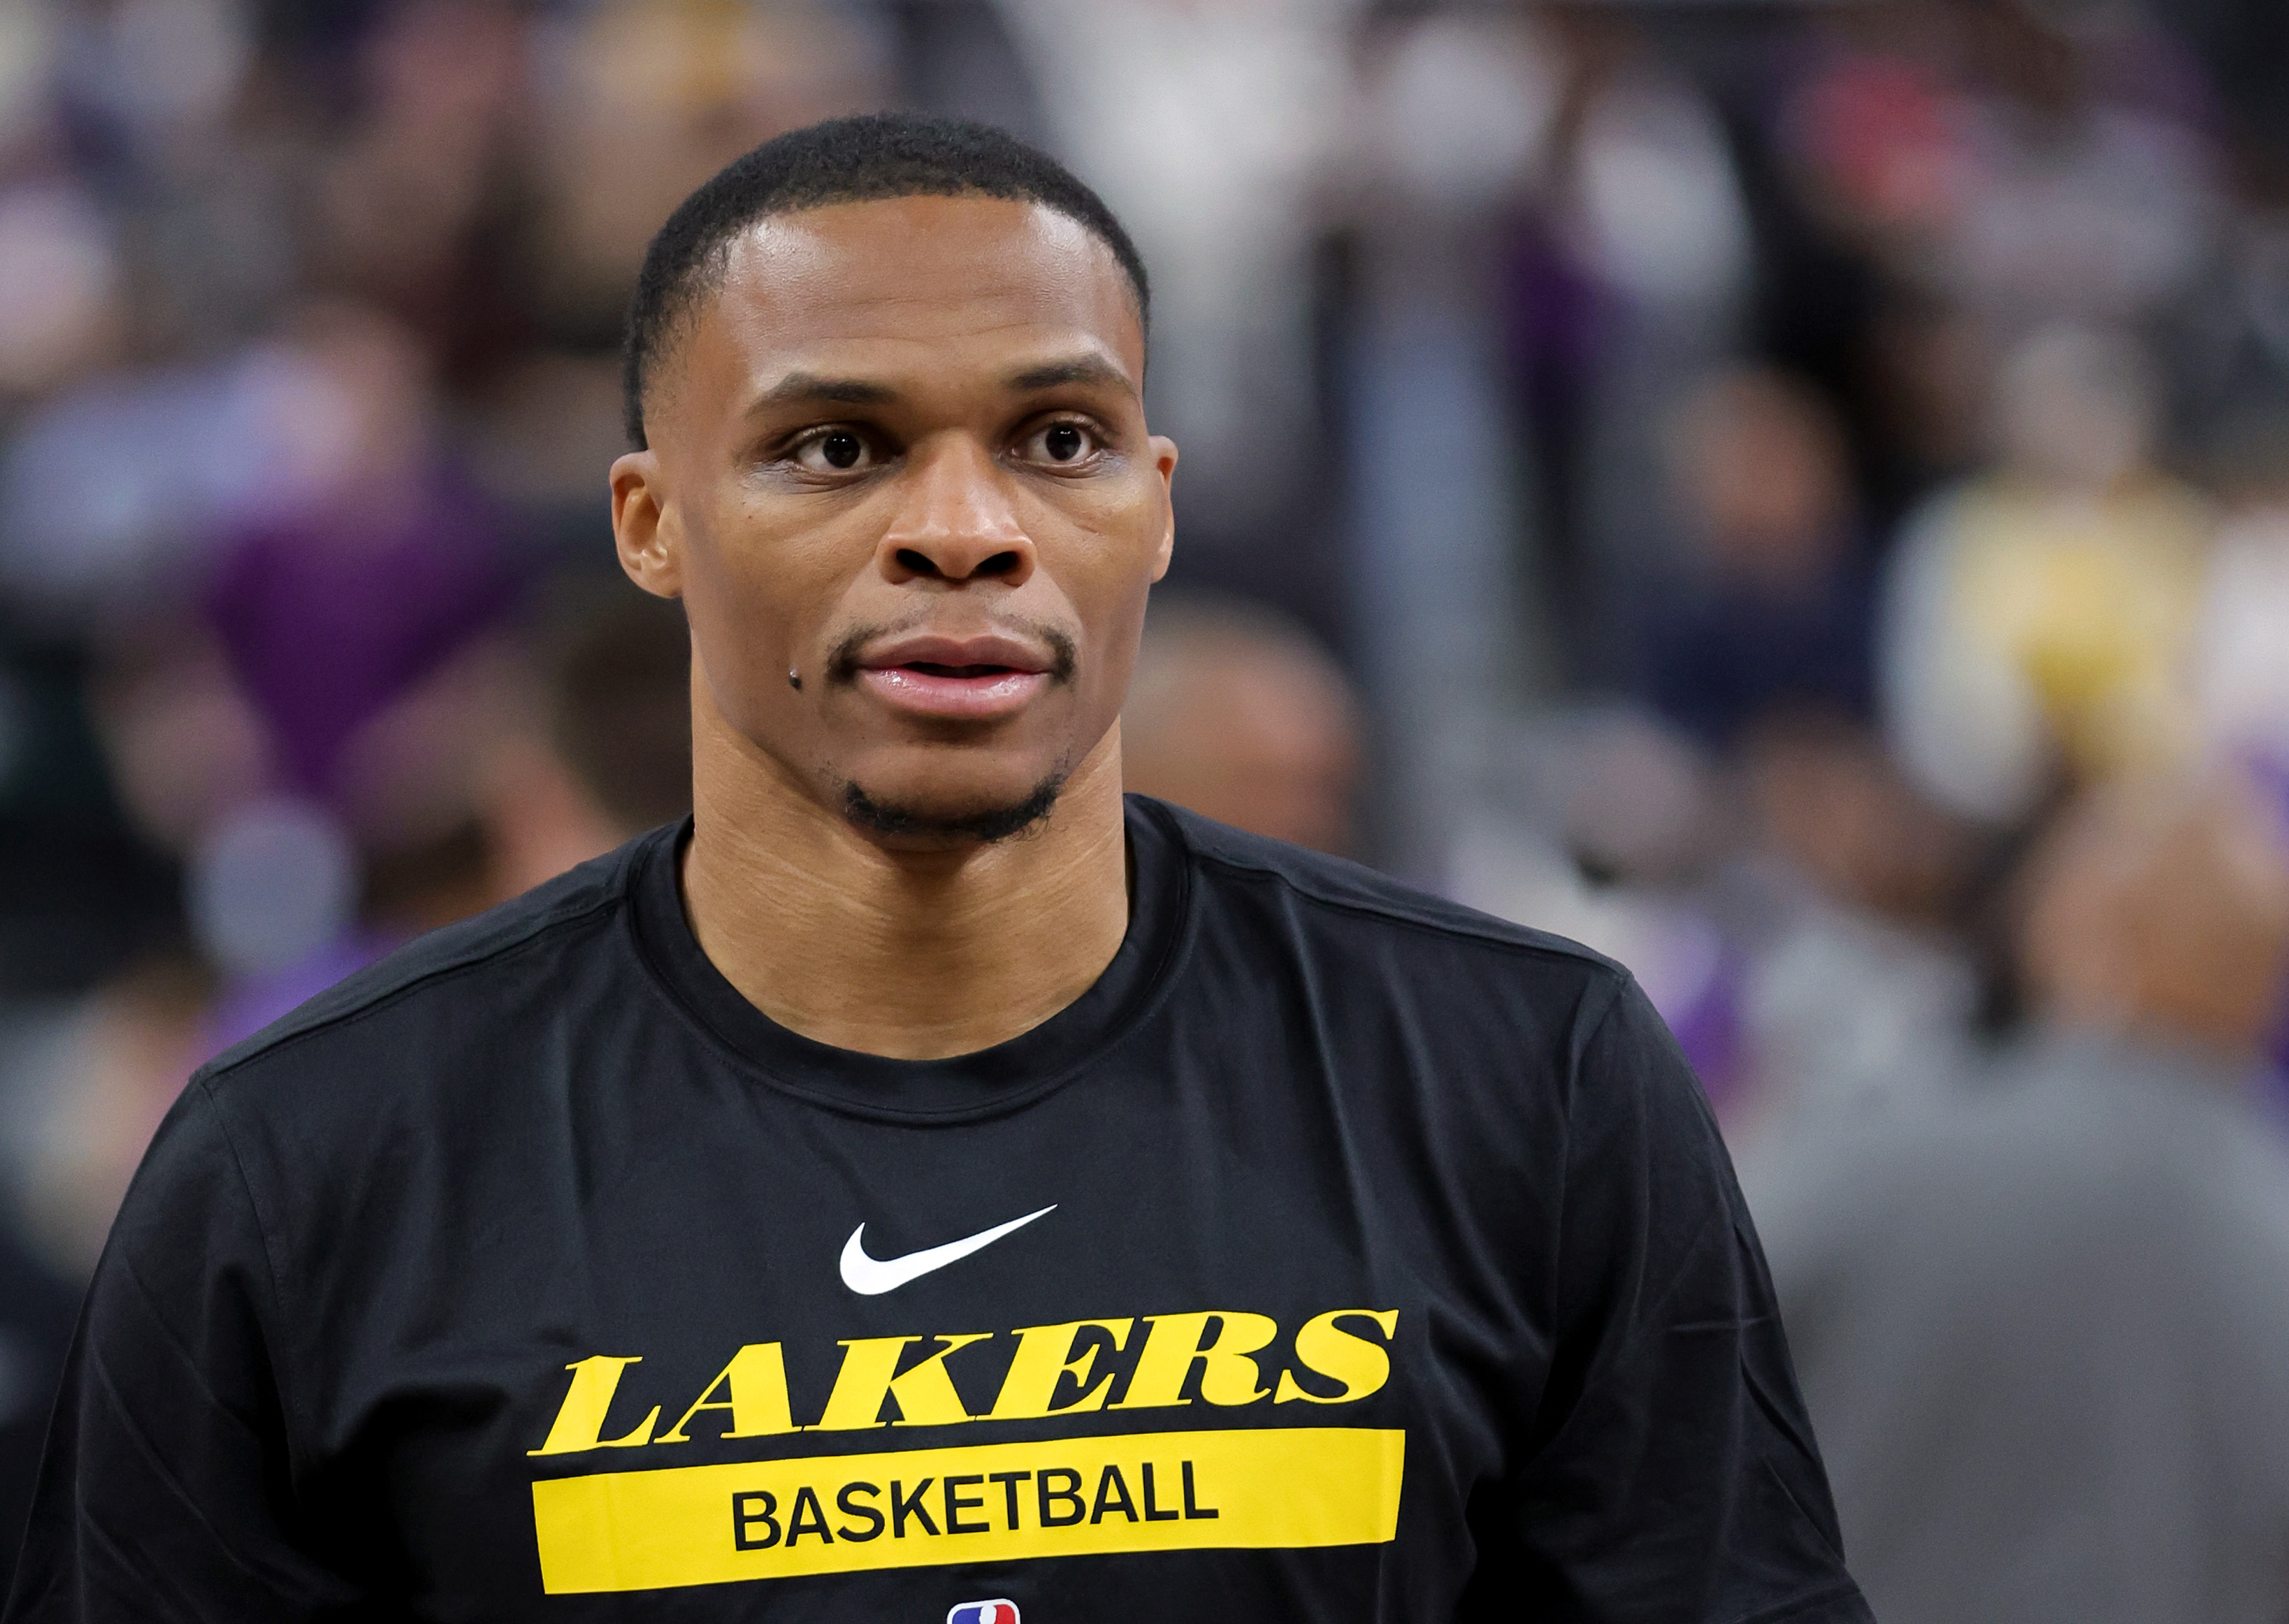 Russell Westbrook of the Los Angeles Lakers warms up before a preseason game.